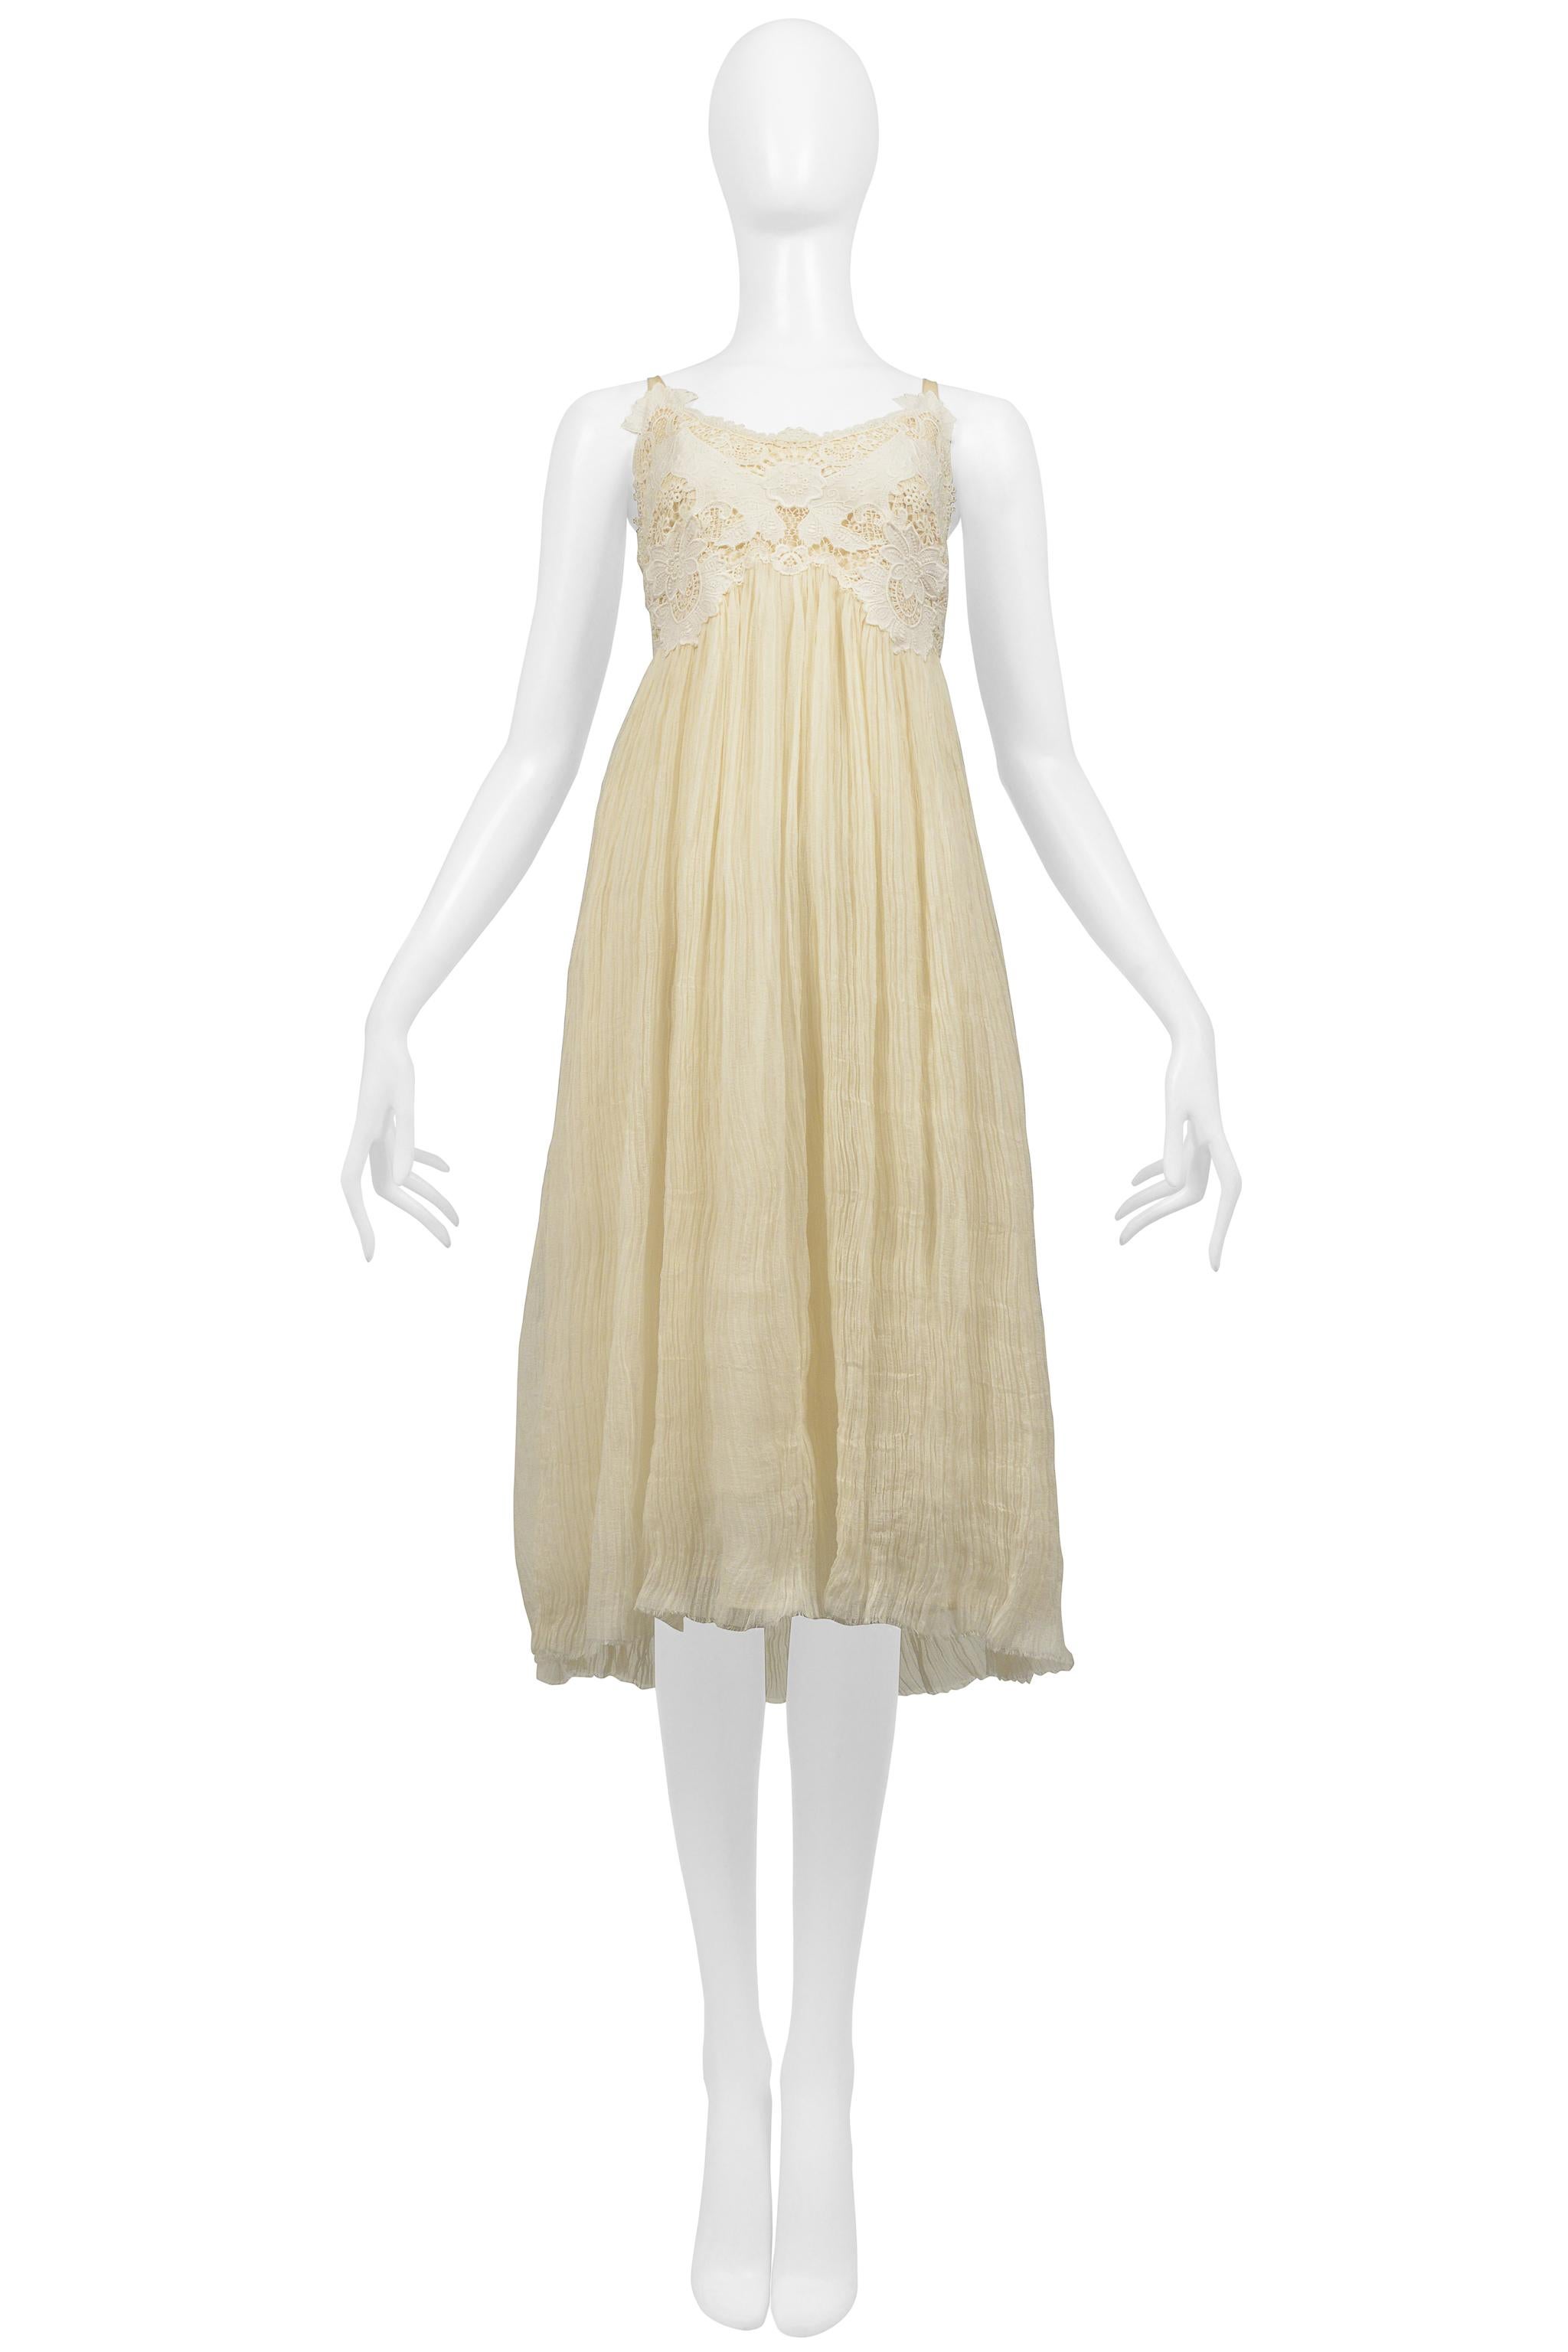 Resurrection Vintage is thrilled to offer a vintage Alexander McQueen off white dress from the 2005 collection featuring a lace bodice, crinkled body with raw edge hem, spaghetti straps, midi-length, and invisible zipper at back.
* Alexander